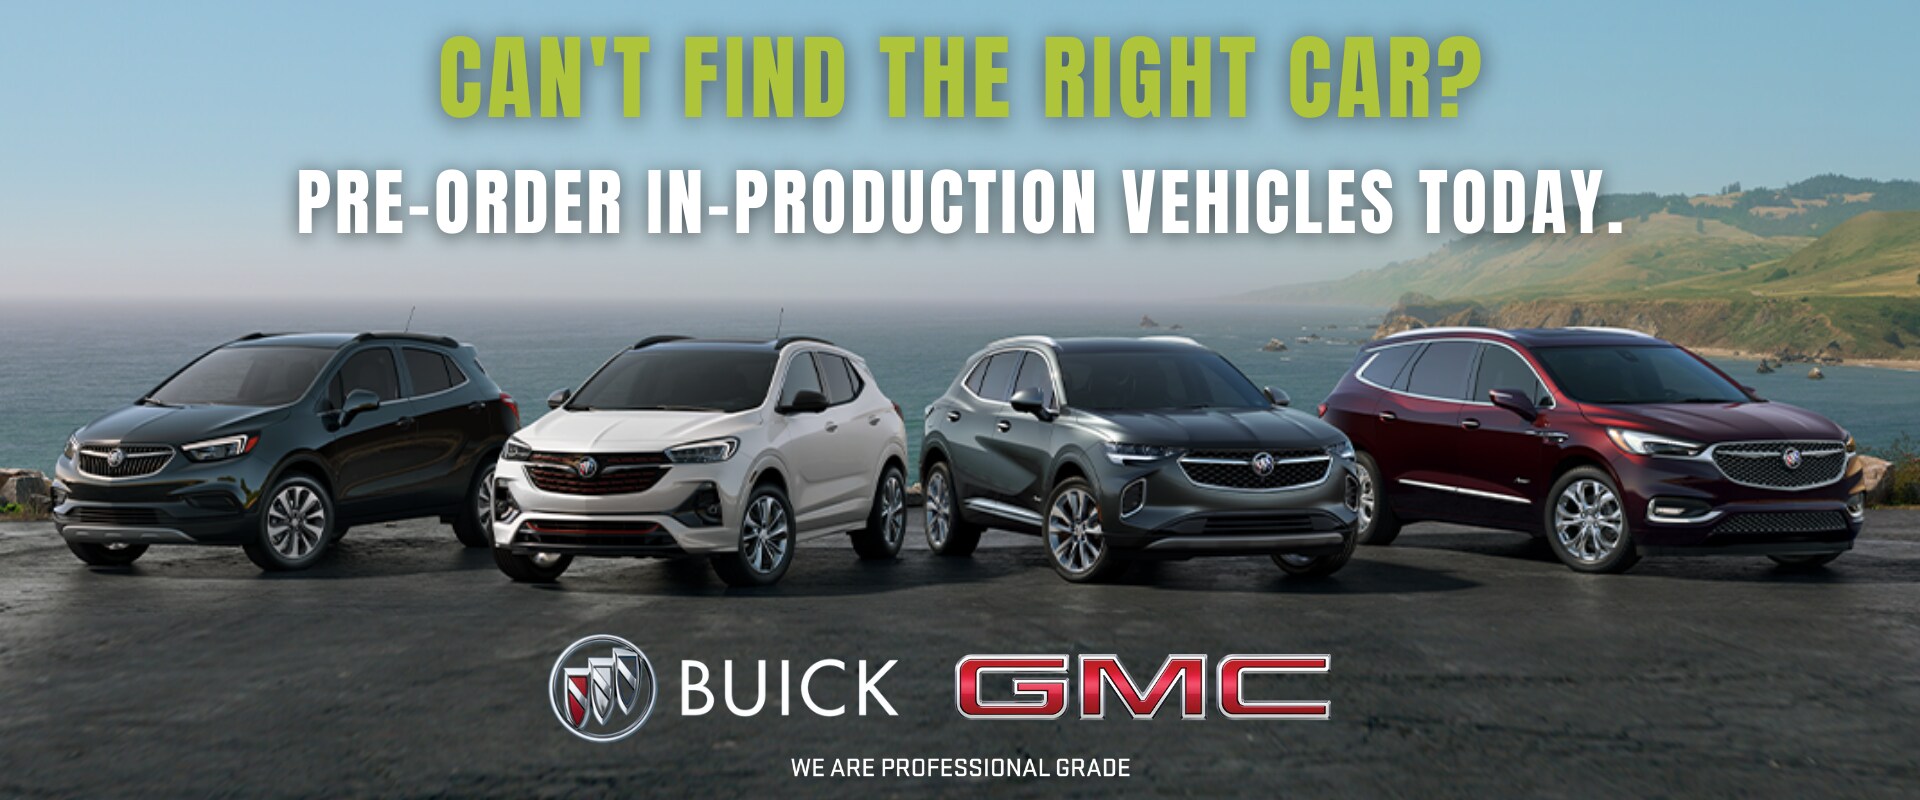 The New GM VIP Program at Octane Buick GMC of Santa Fe where you can pre-order vehicles in-production